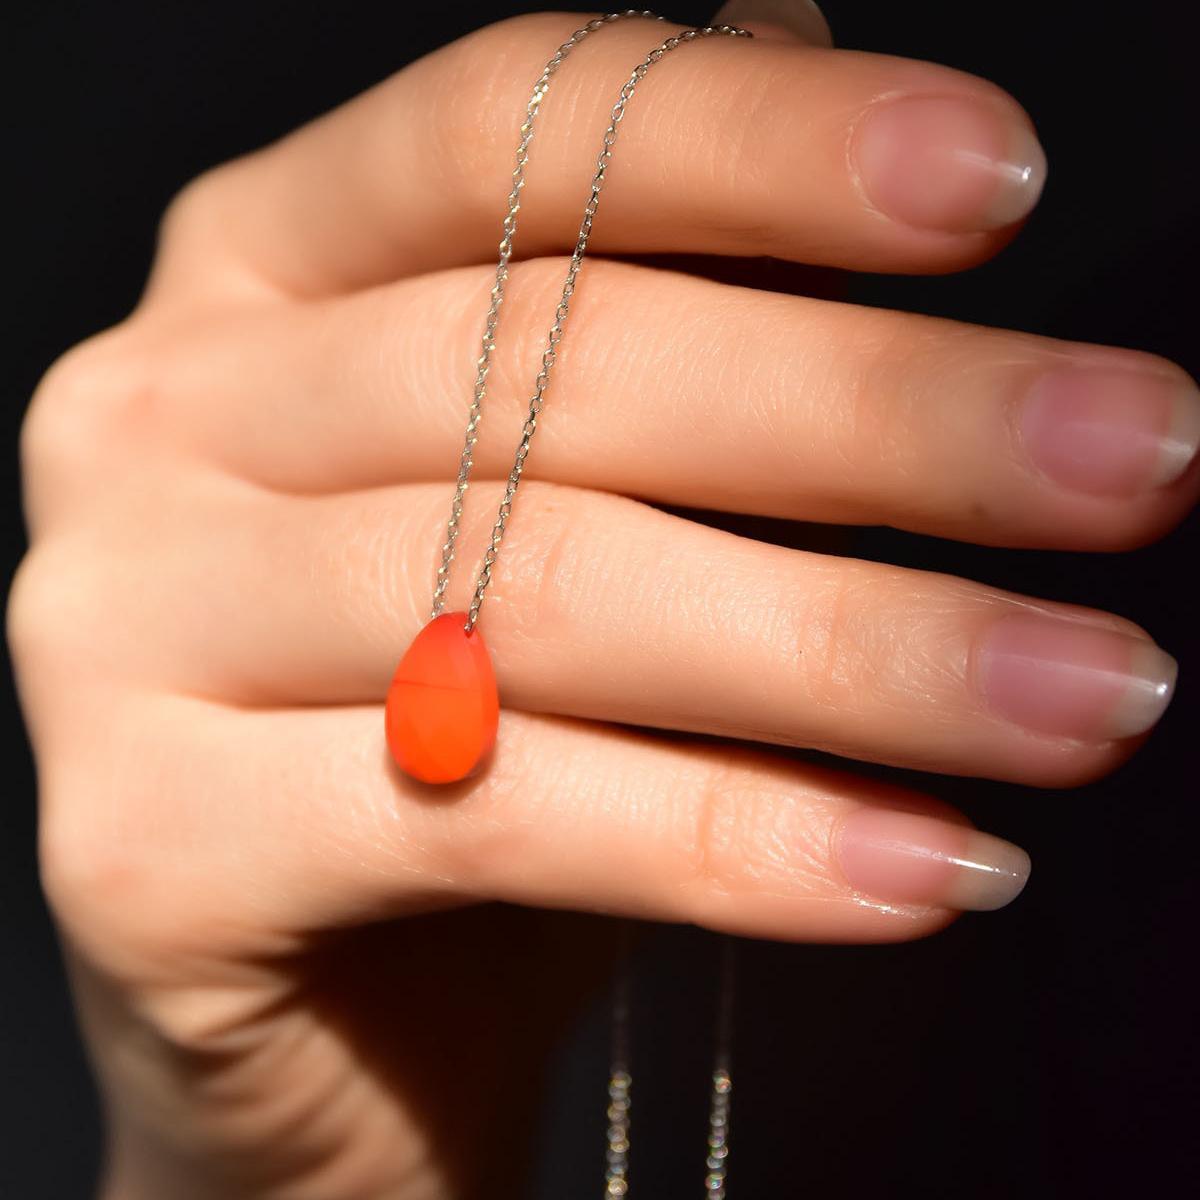 Natural Polished Stone Orange Necklace • Diamond Drop Pendant Necklace - Trending Silver Gifts